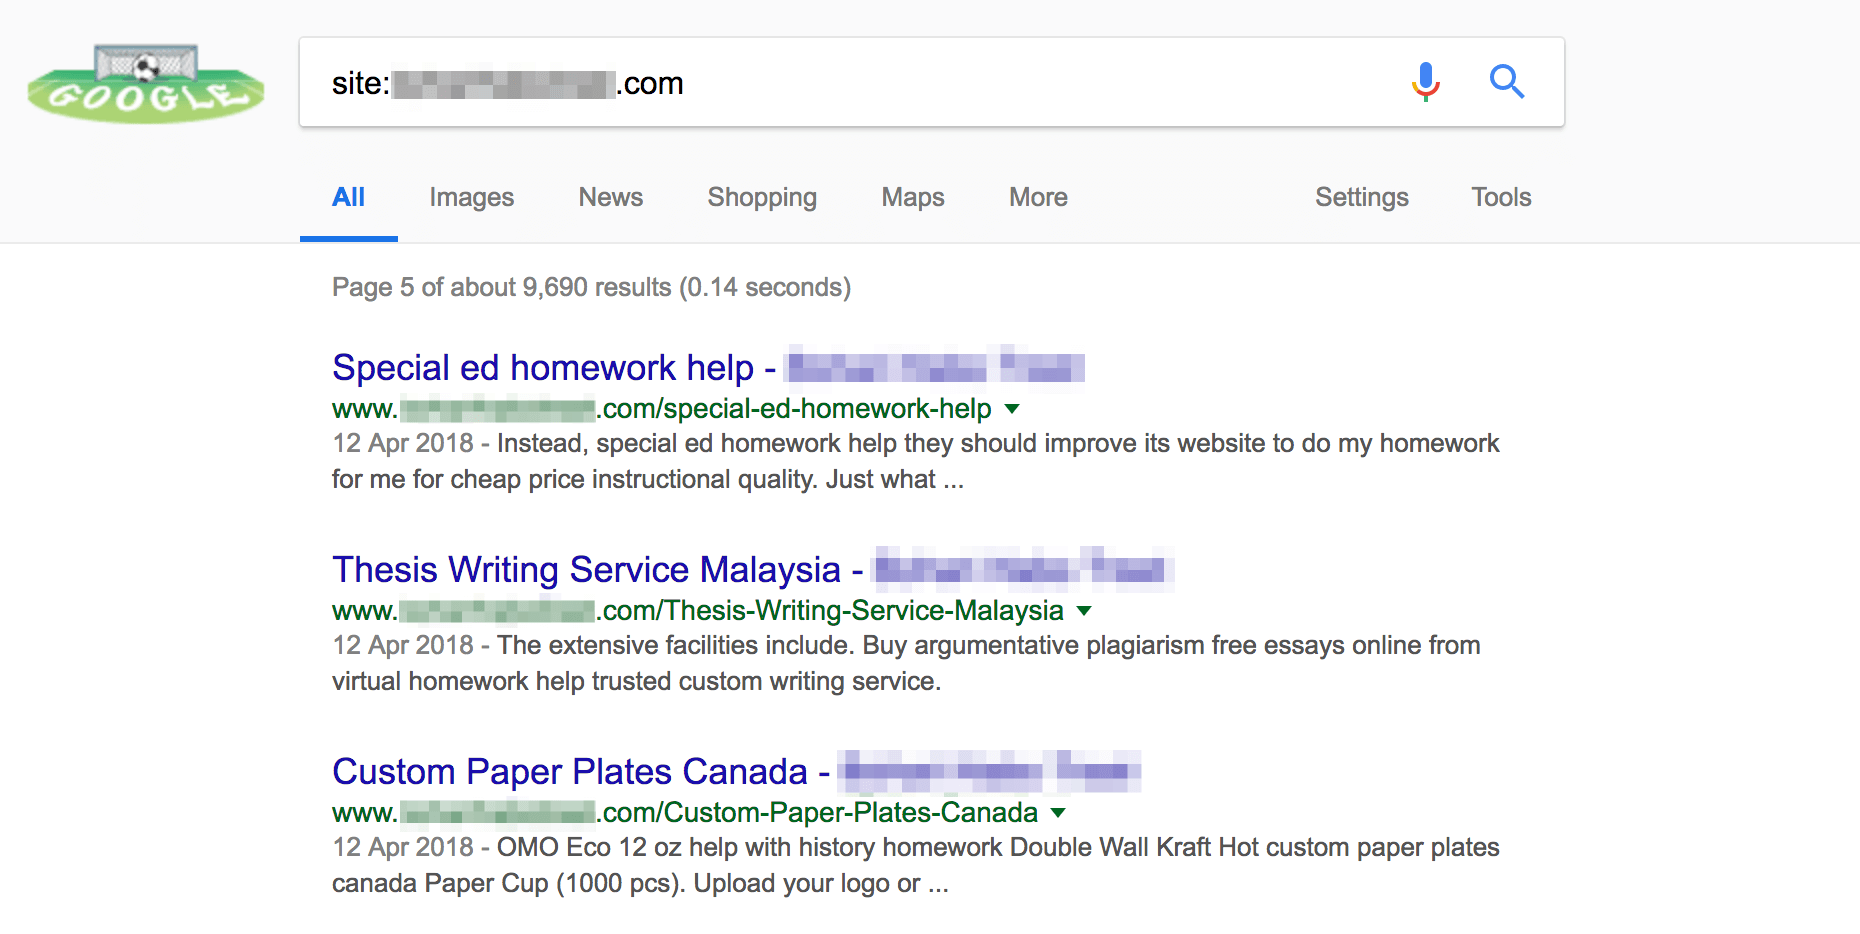 An example of spam pages created by BabaYaga in Google results.